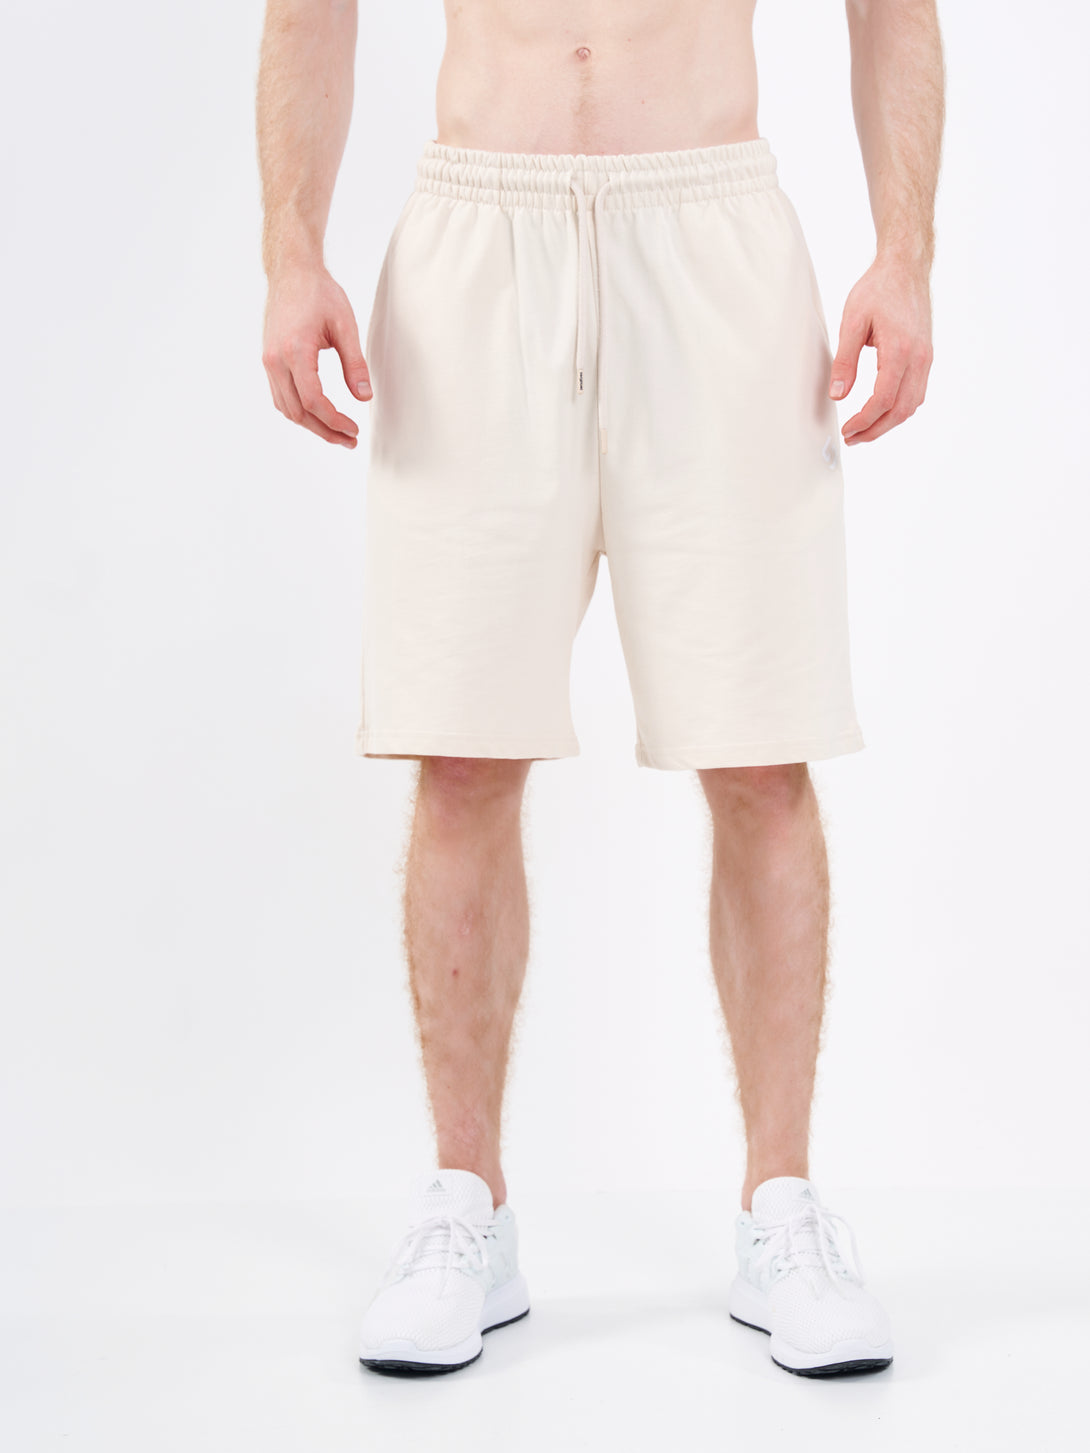 A Man Wearing White Sand Color Men's Easy-Fit Shorts for All-Day Wear